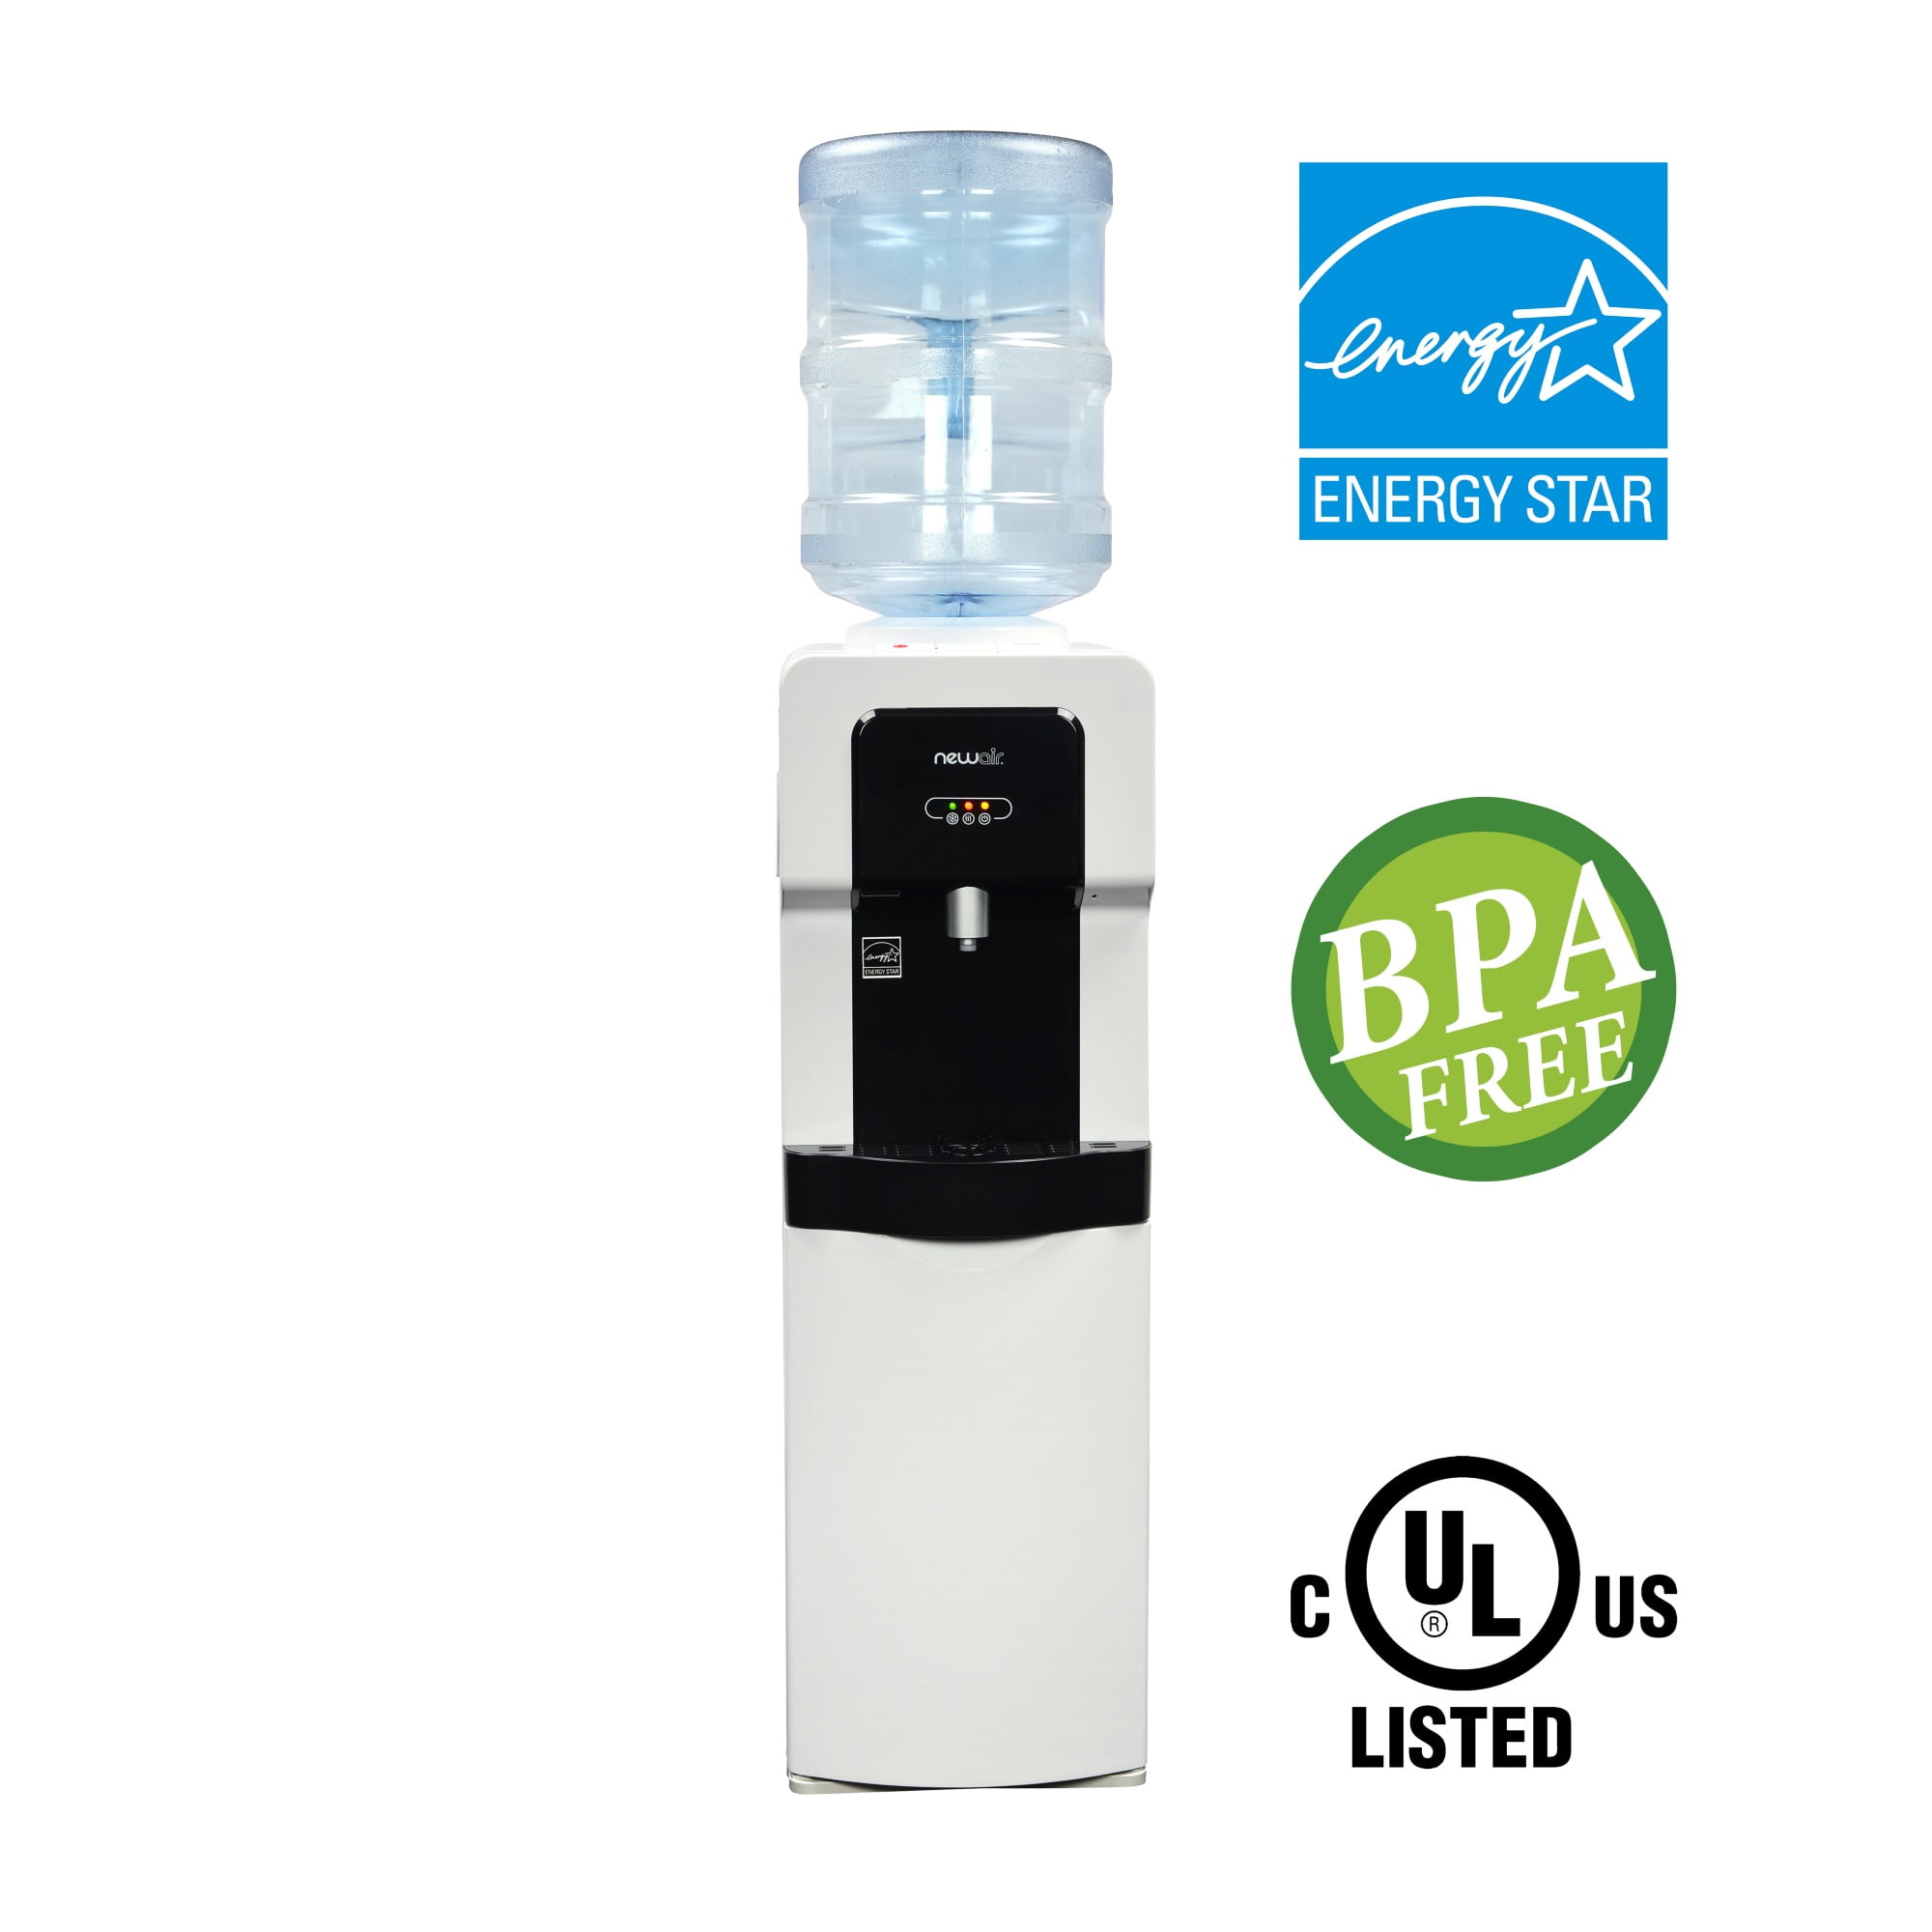 H2O-2200 3-Temperature Bottleless Water Dispenser – Pure n Natural Systems